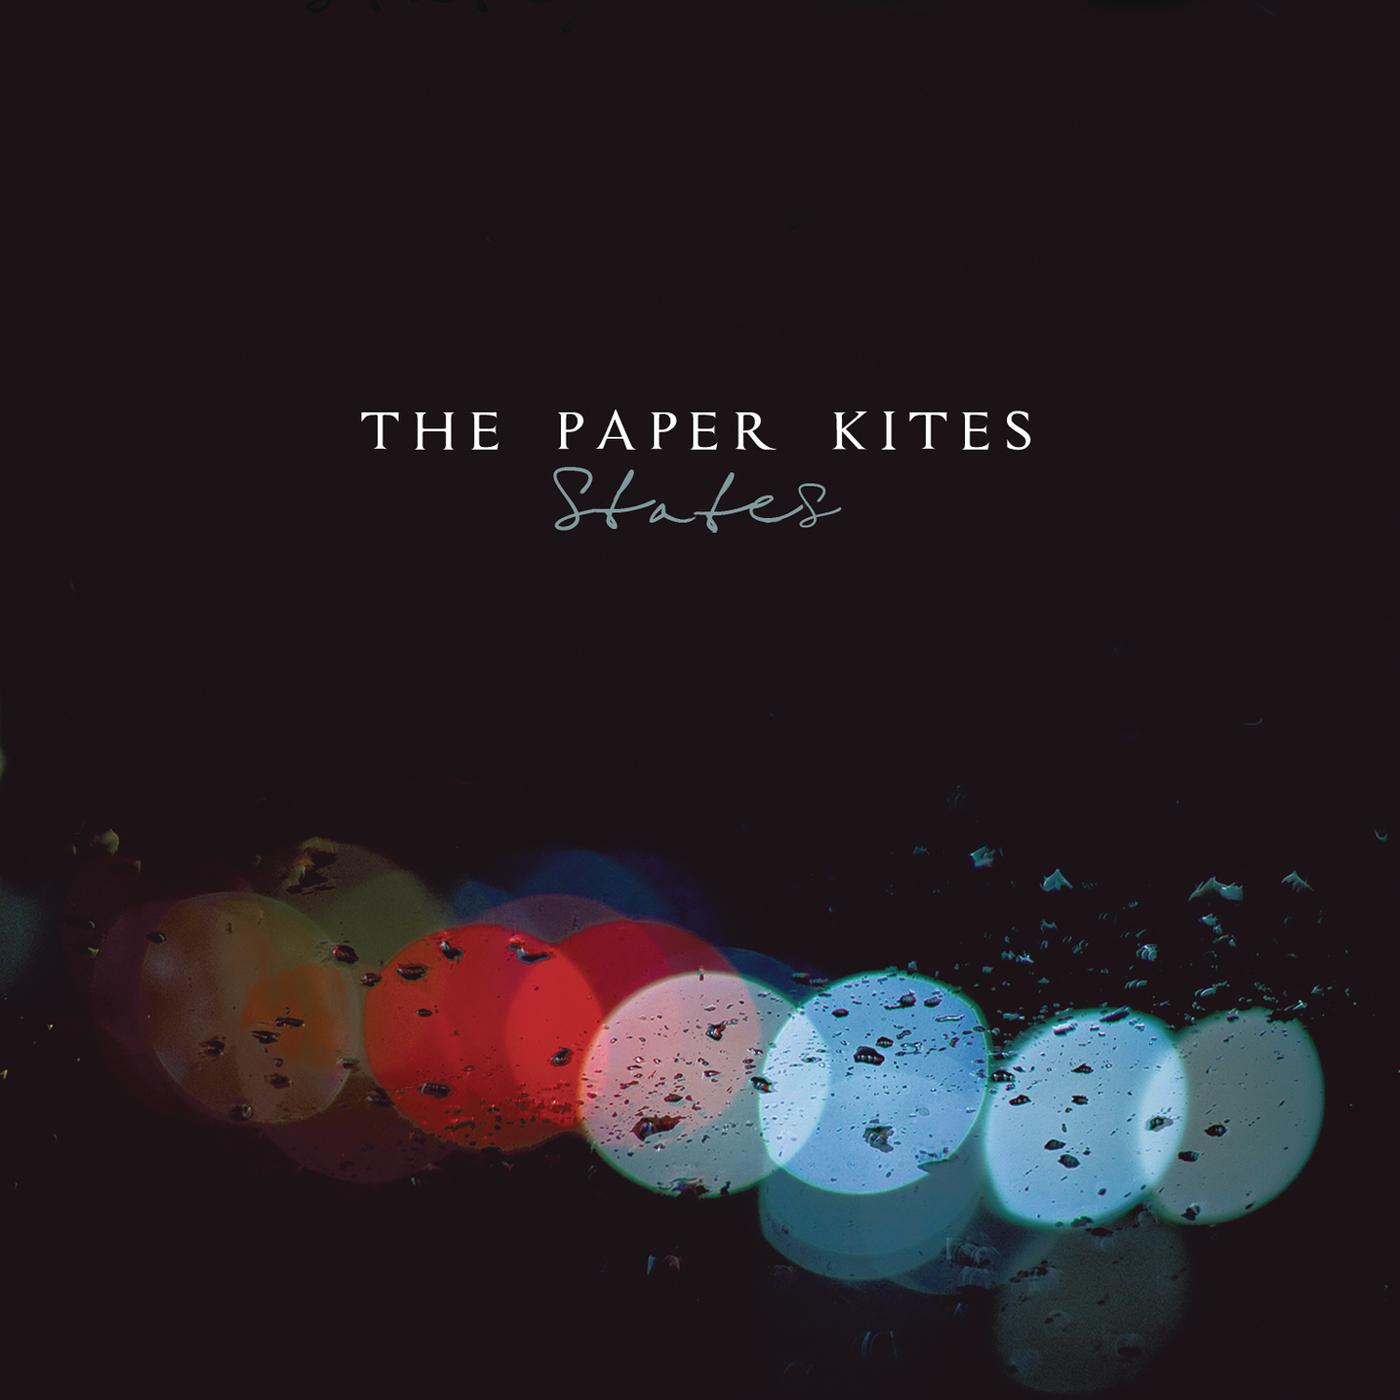 Malleable Beings歌词 歌手The Paper Kites-专辑States-单曲《Malleable Beings》LRC歌词下载